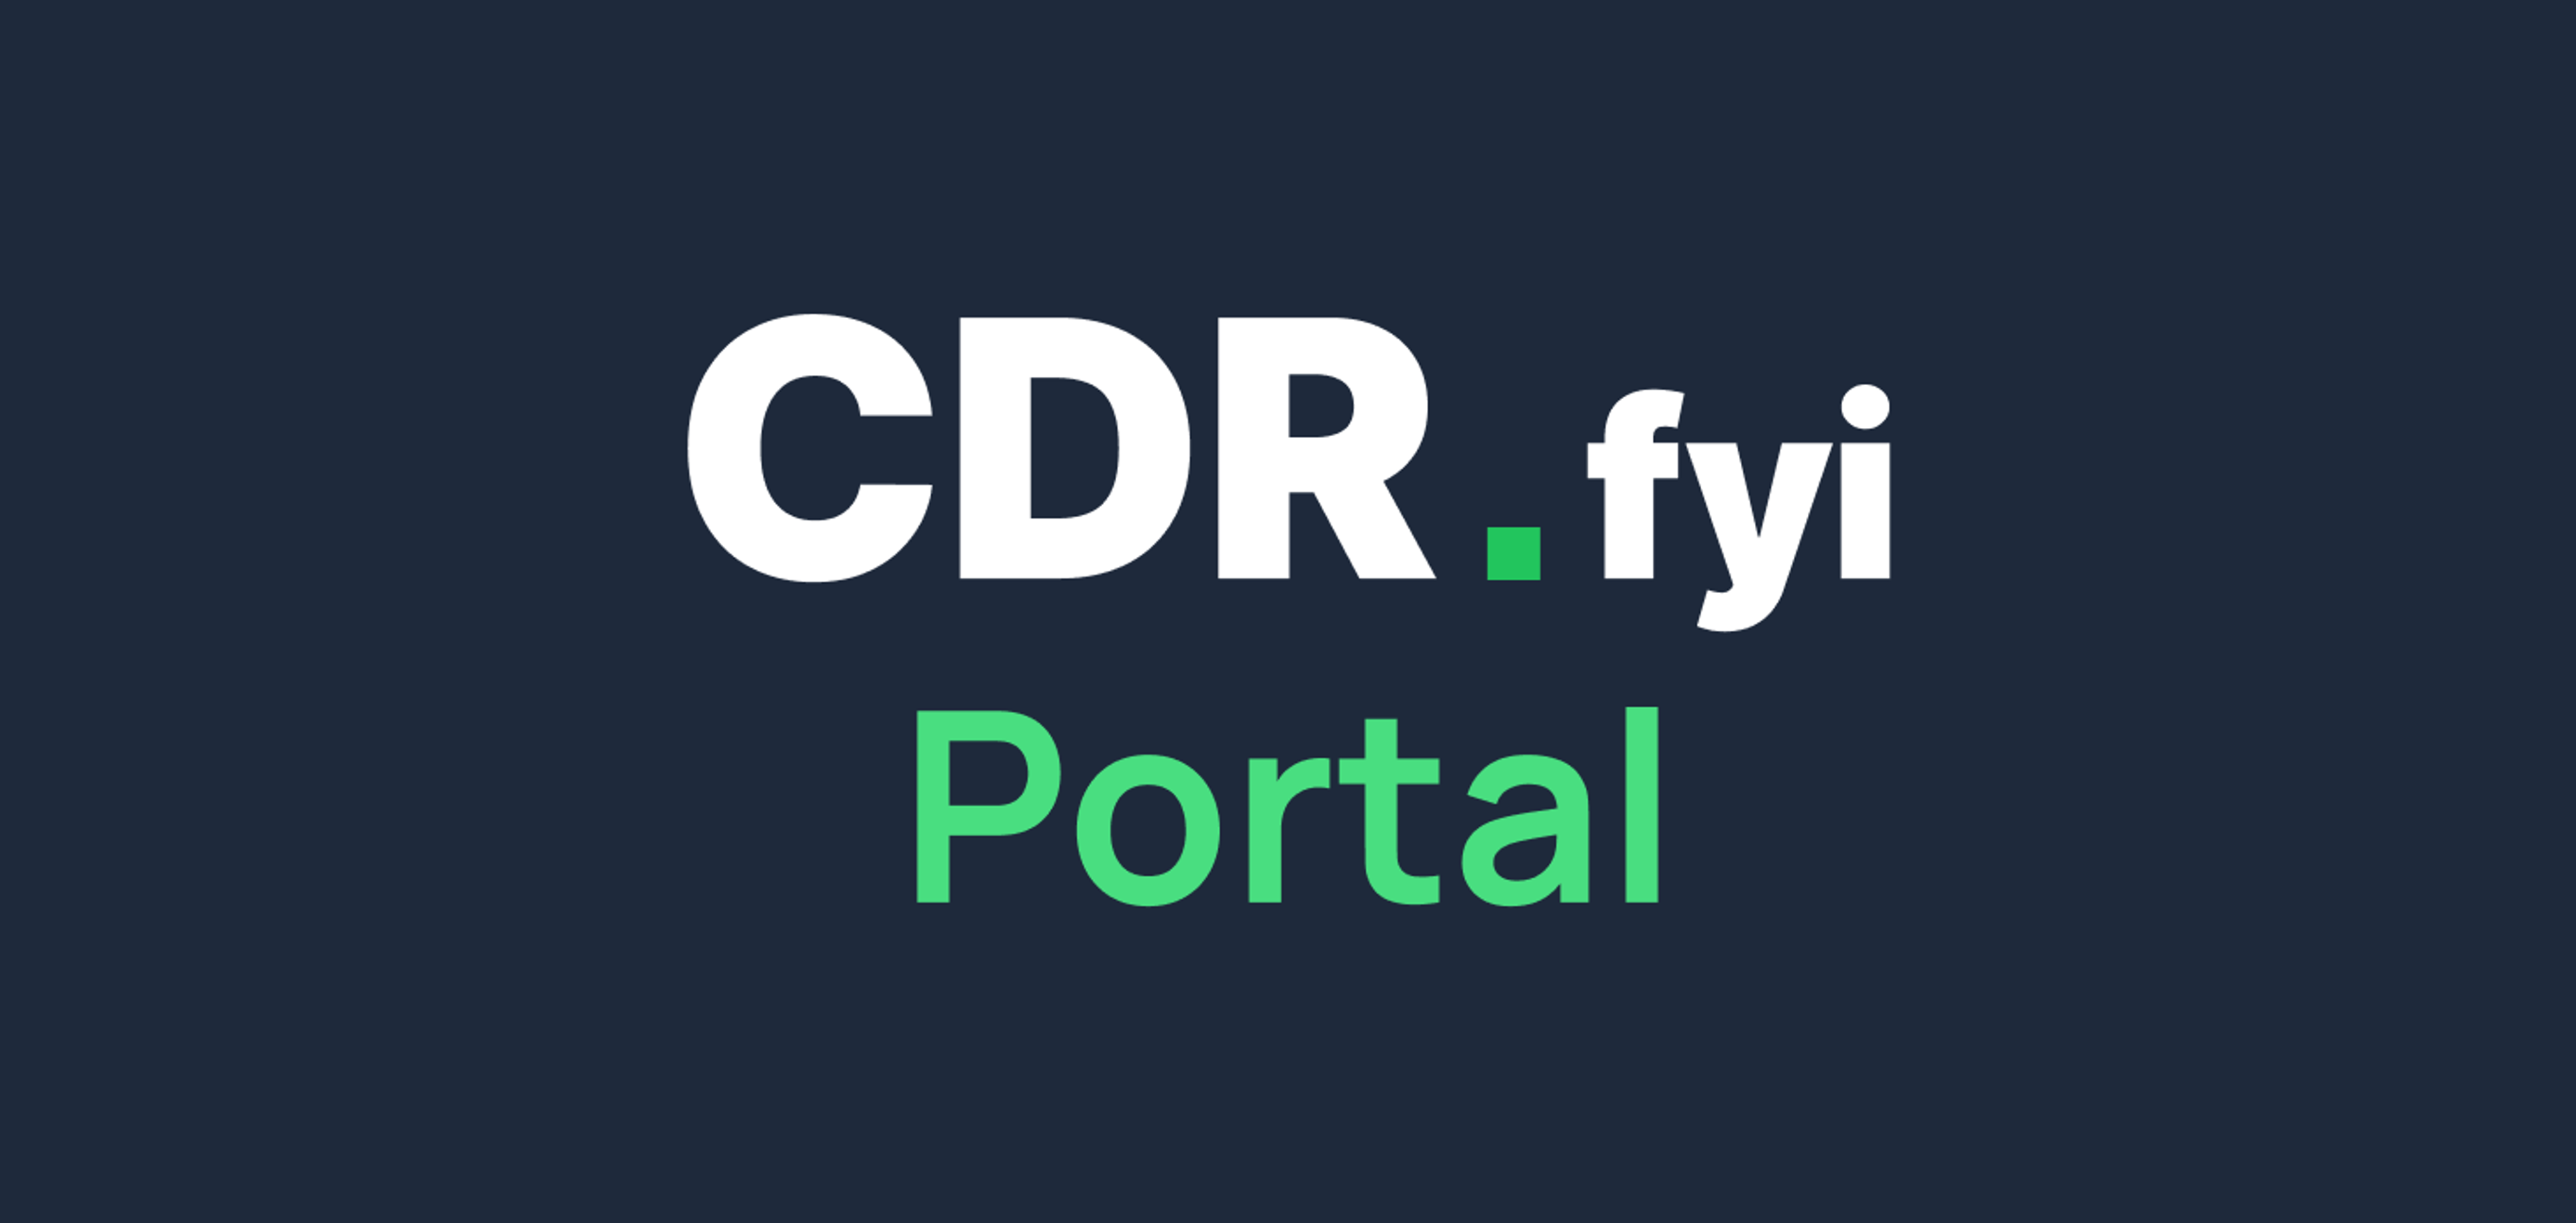 Introducing the CDR.fyi Portal: Streamline sales & delivery reporting for carbon removal blog post image